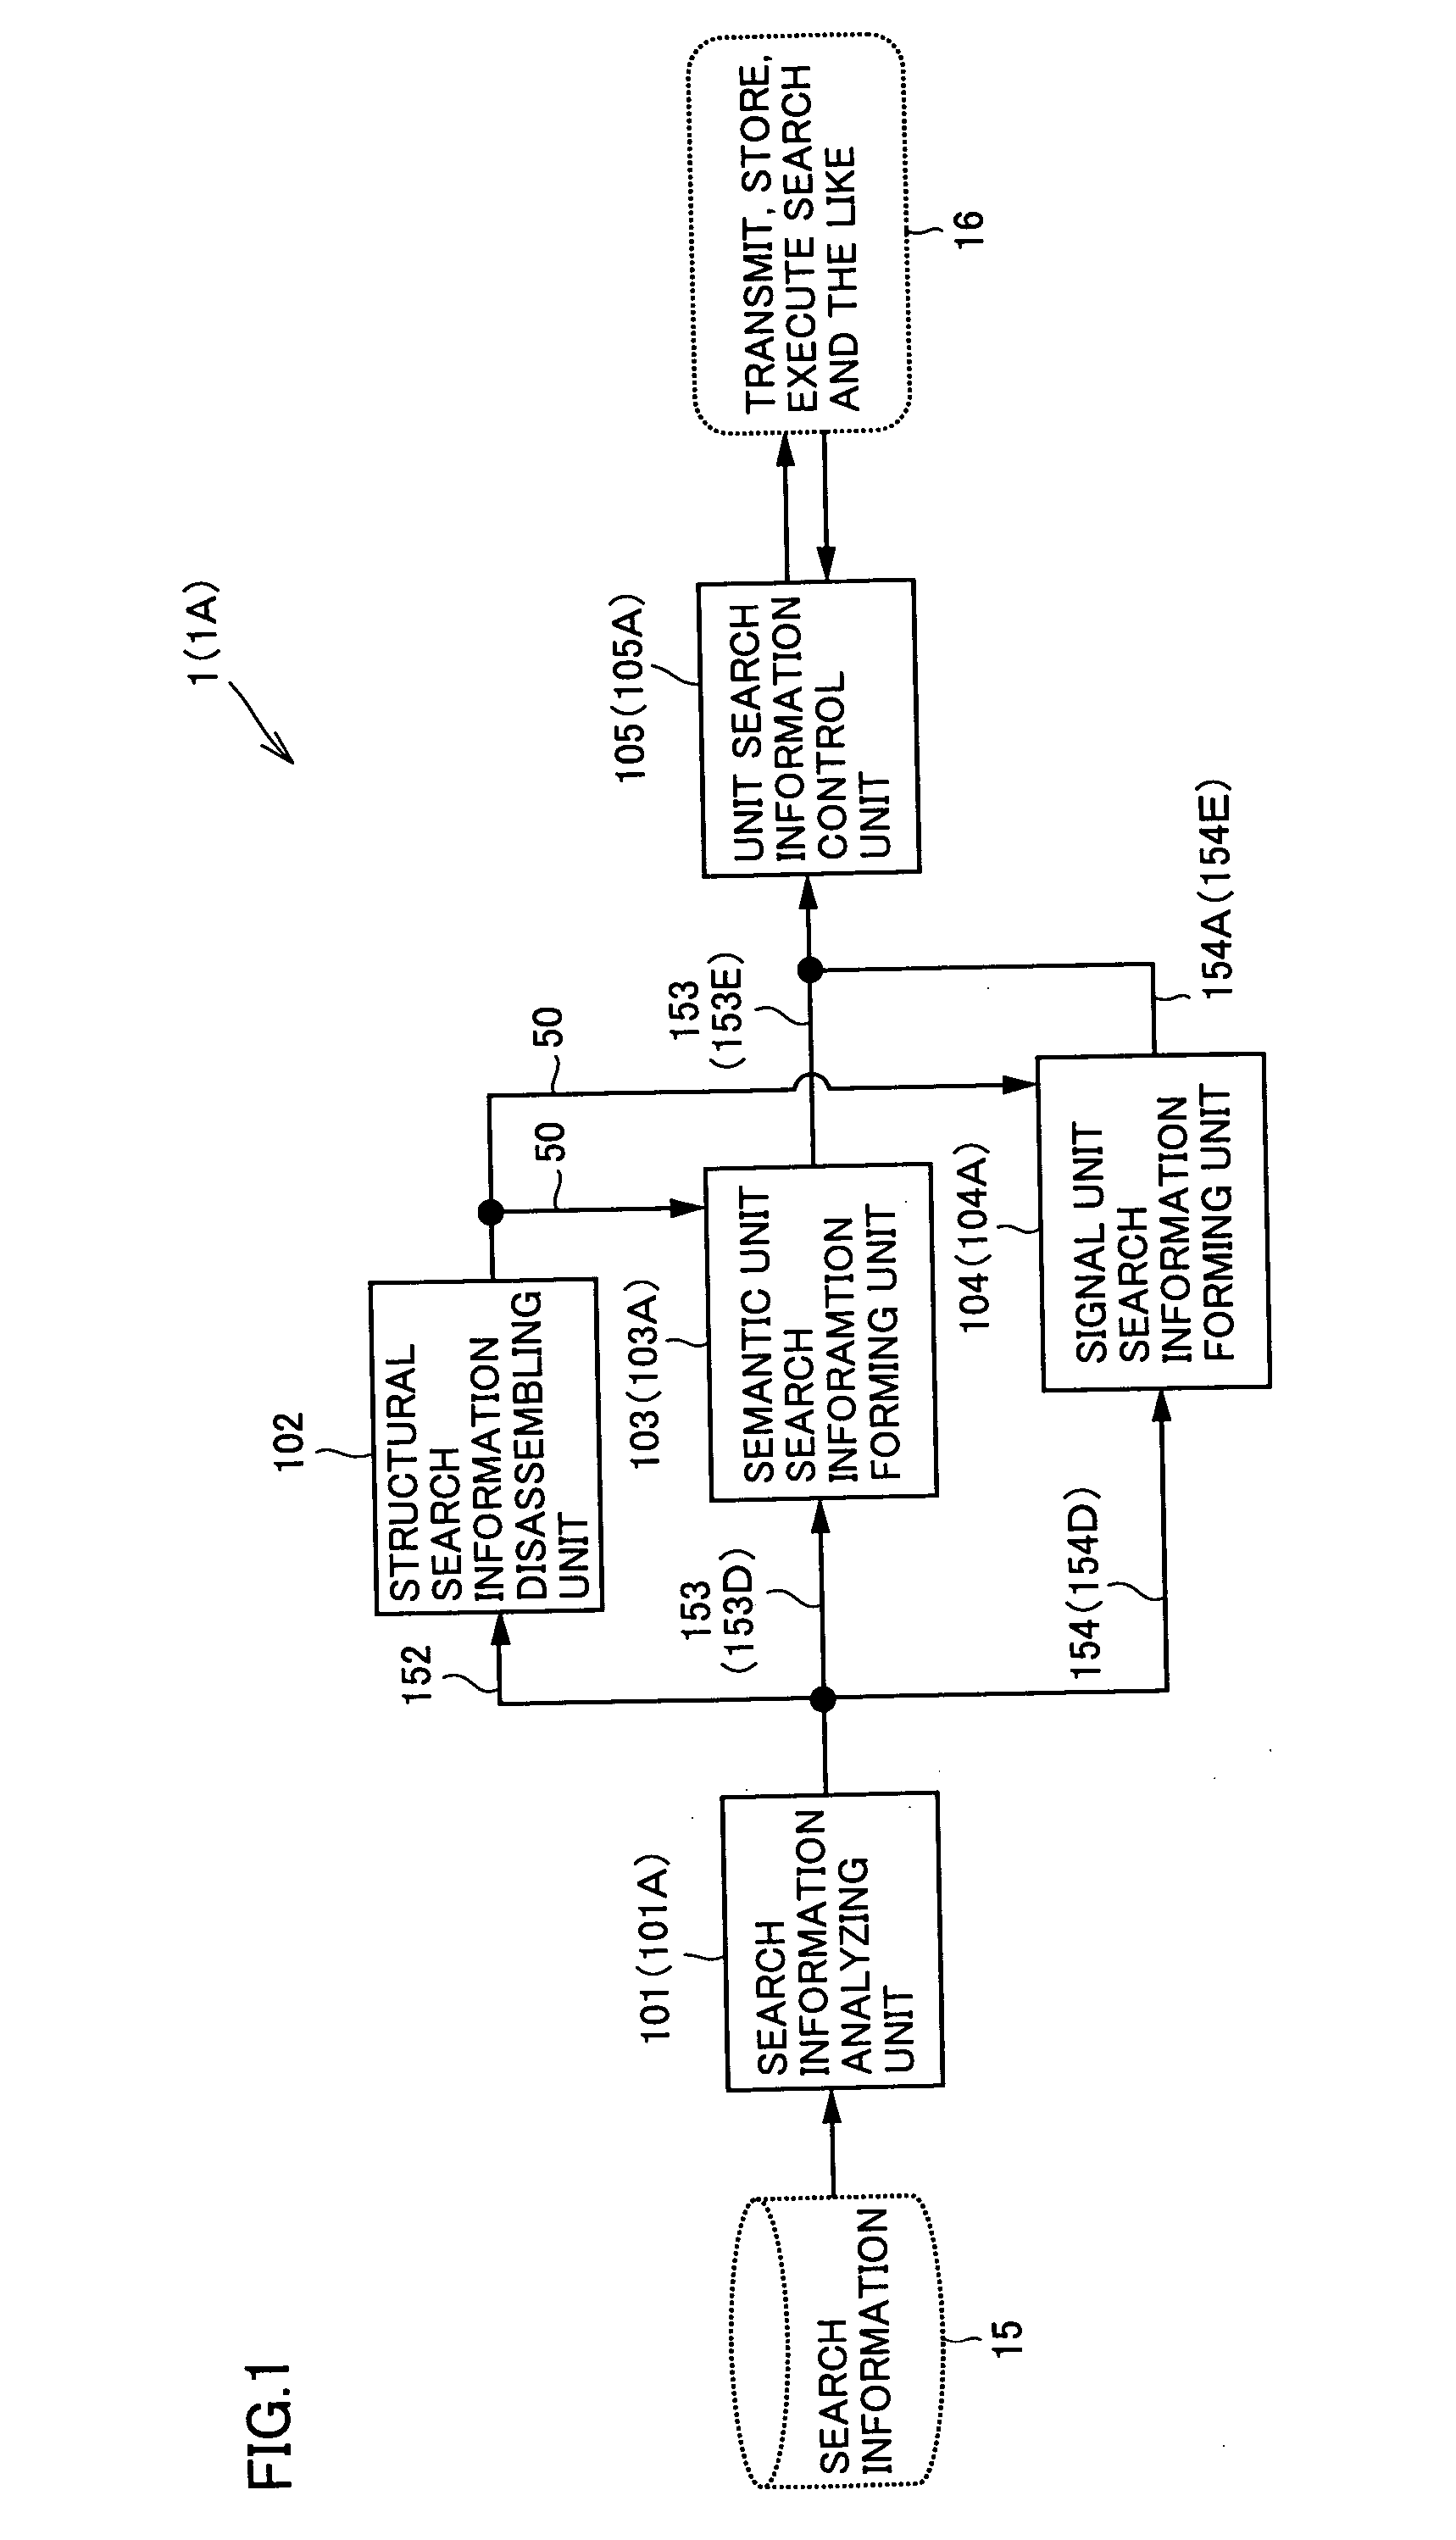 Search information managing for moving image contents